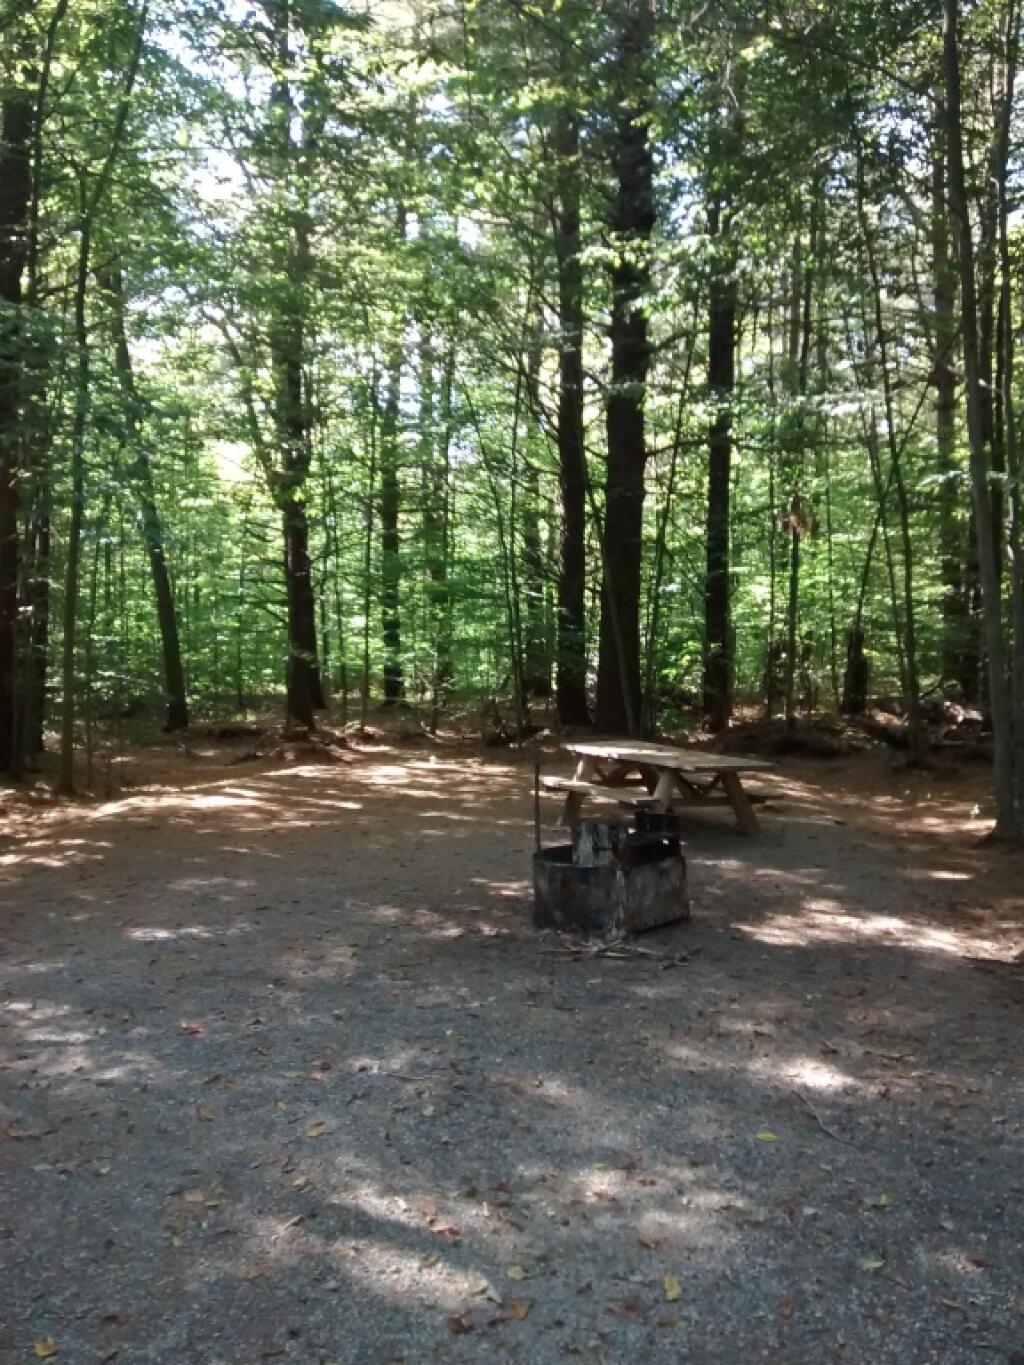  New Campsite At Otter Creek